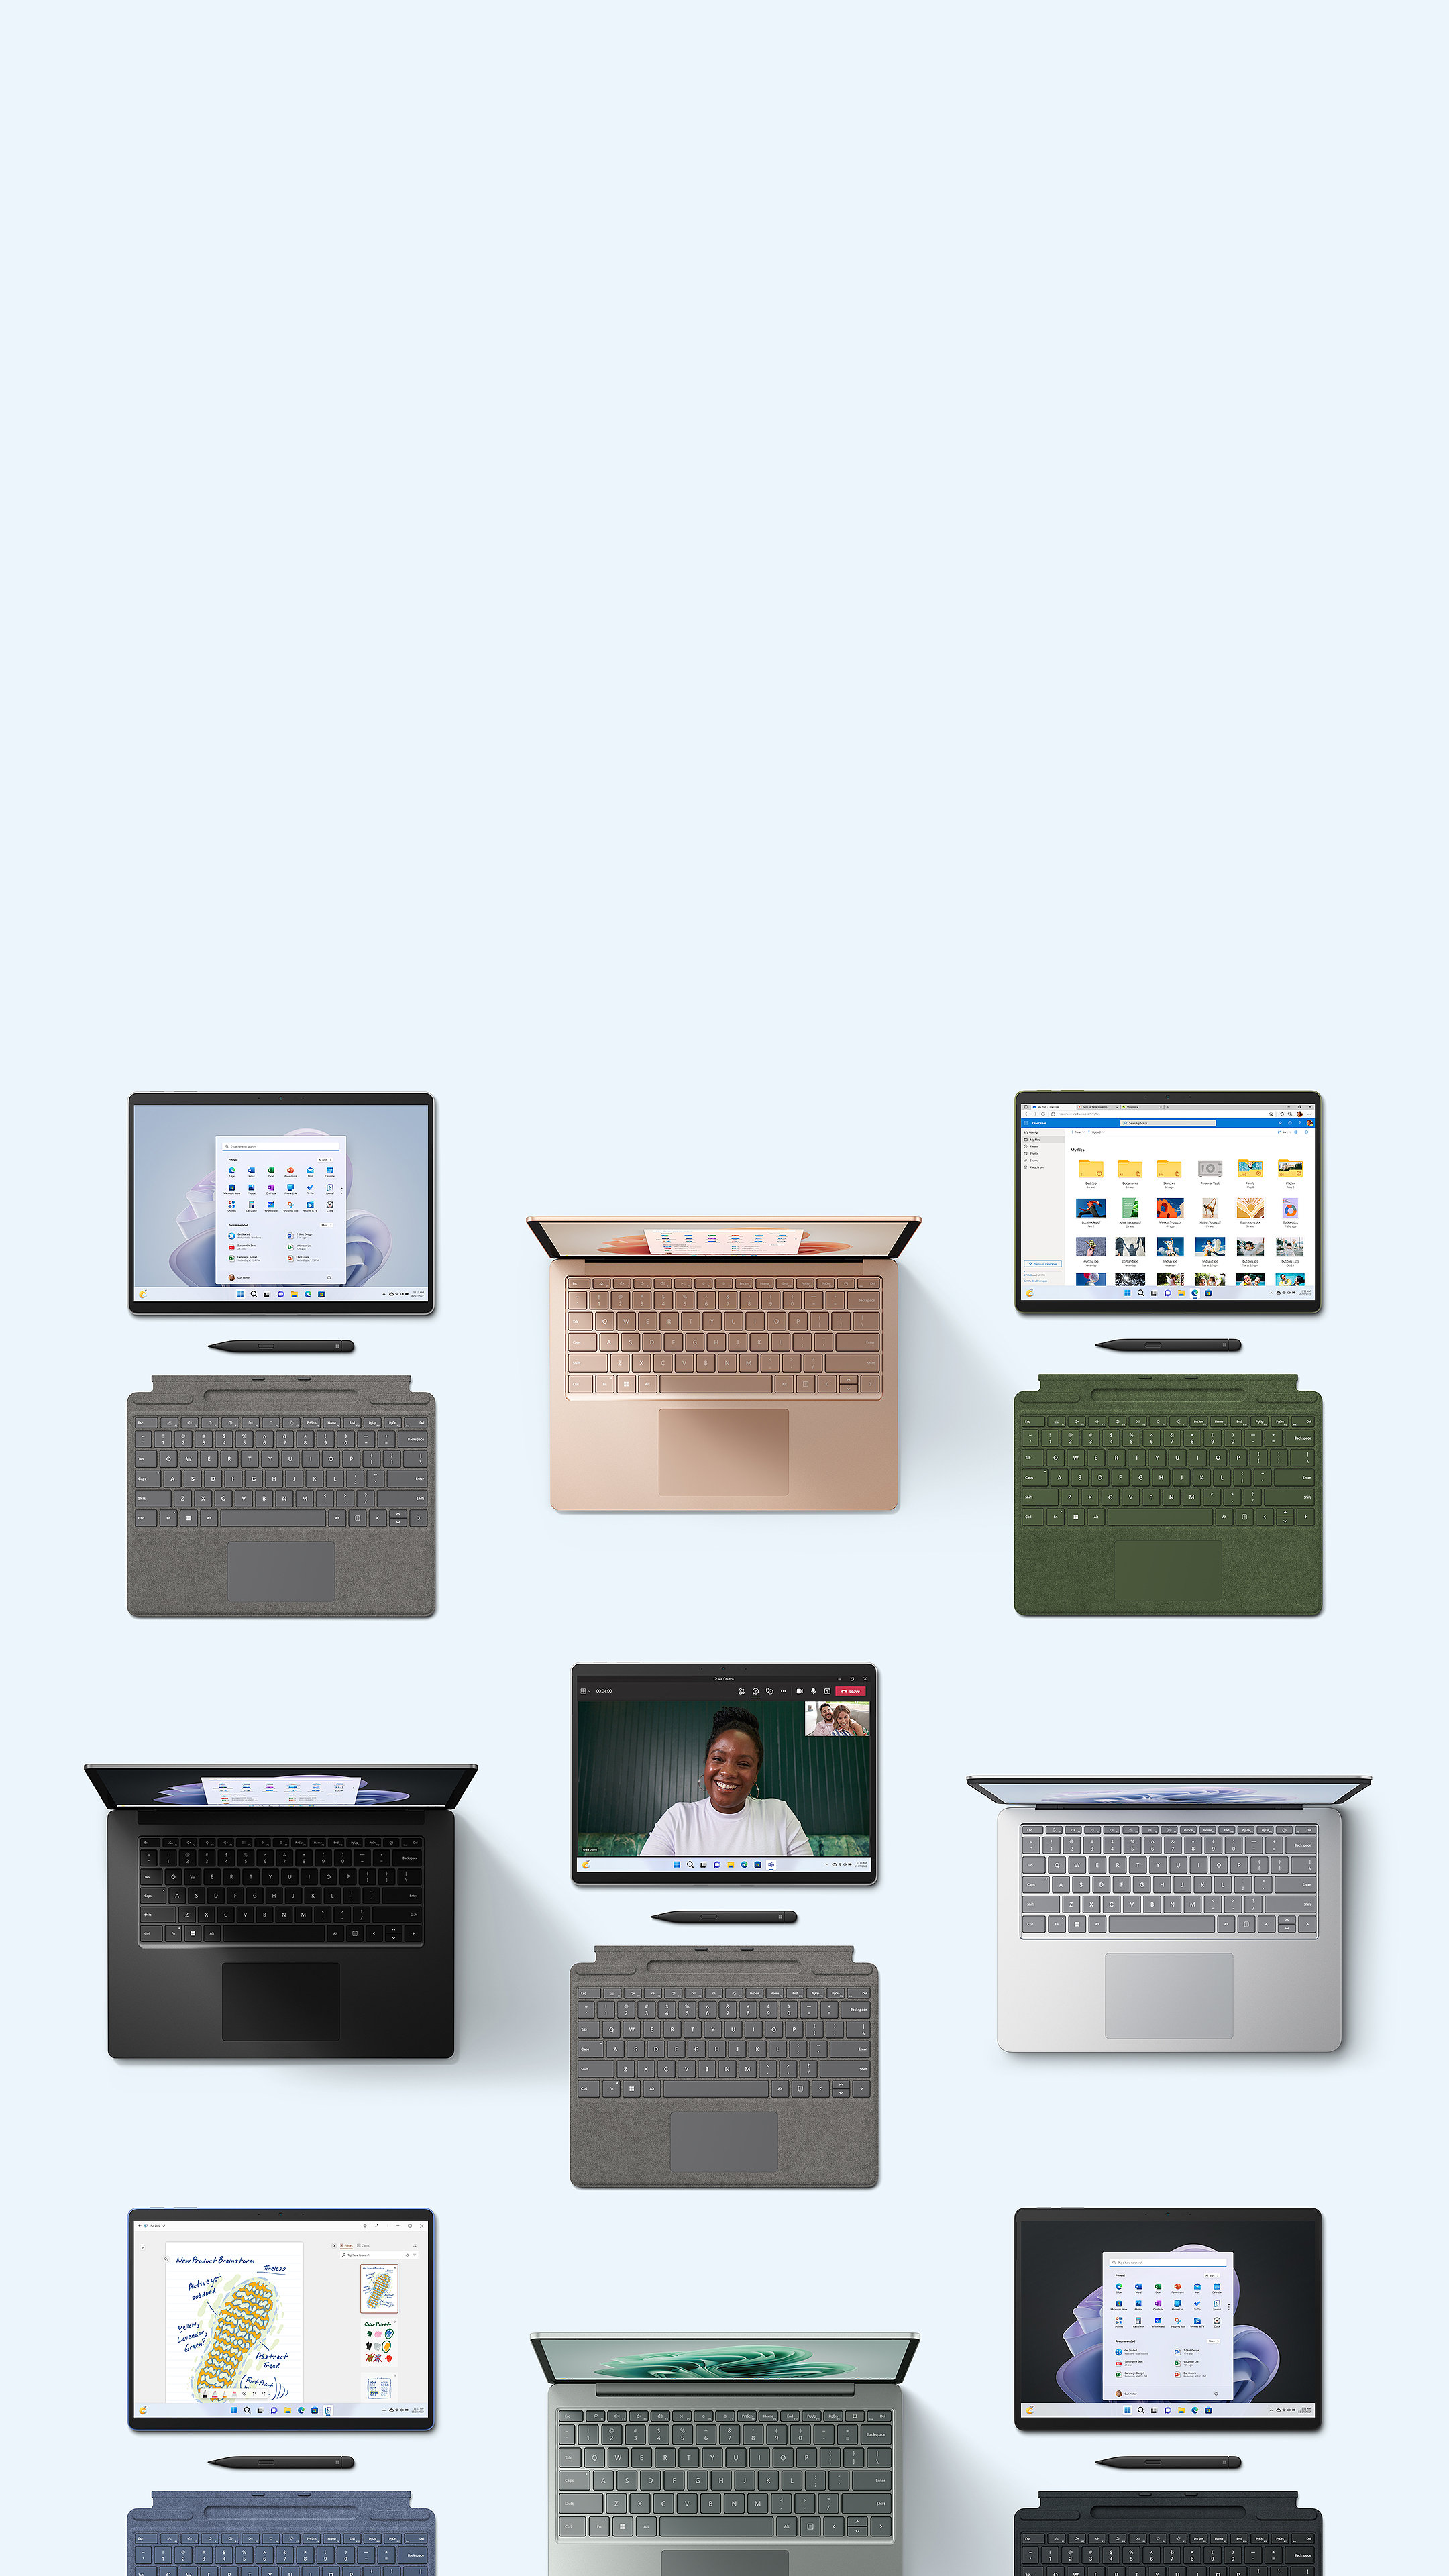 A collection of Surface family devices